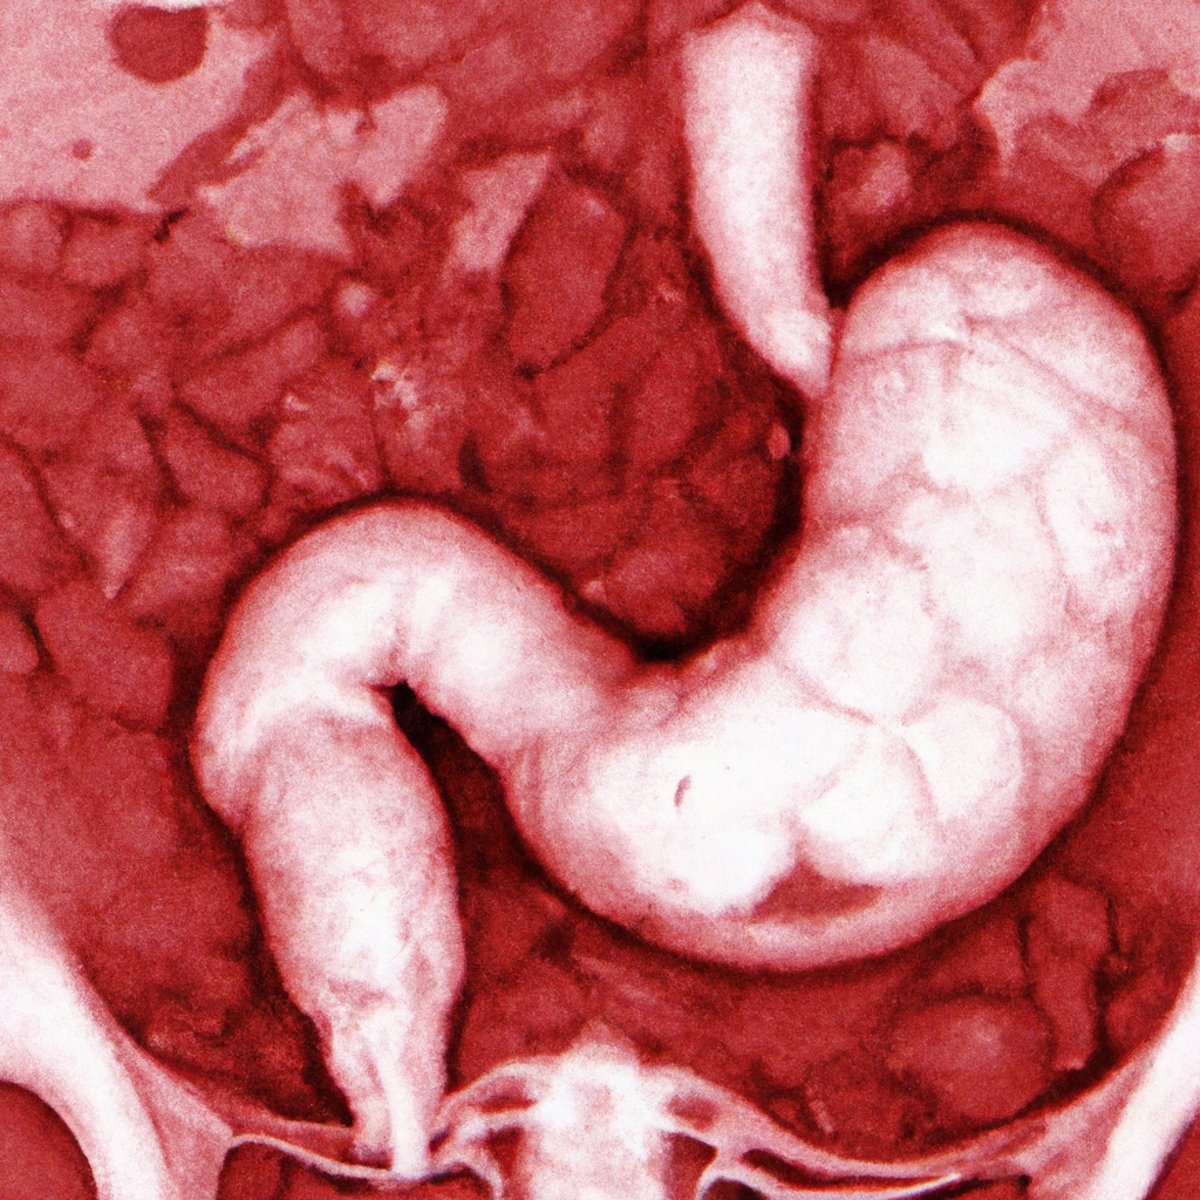 Inflamed gallbladder specimen with yellow nodules and thickened walls, illustrating Xanthogranulomatous Cholecystitis.